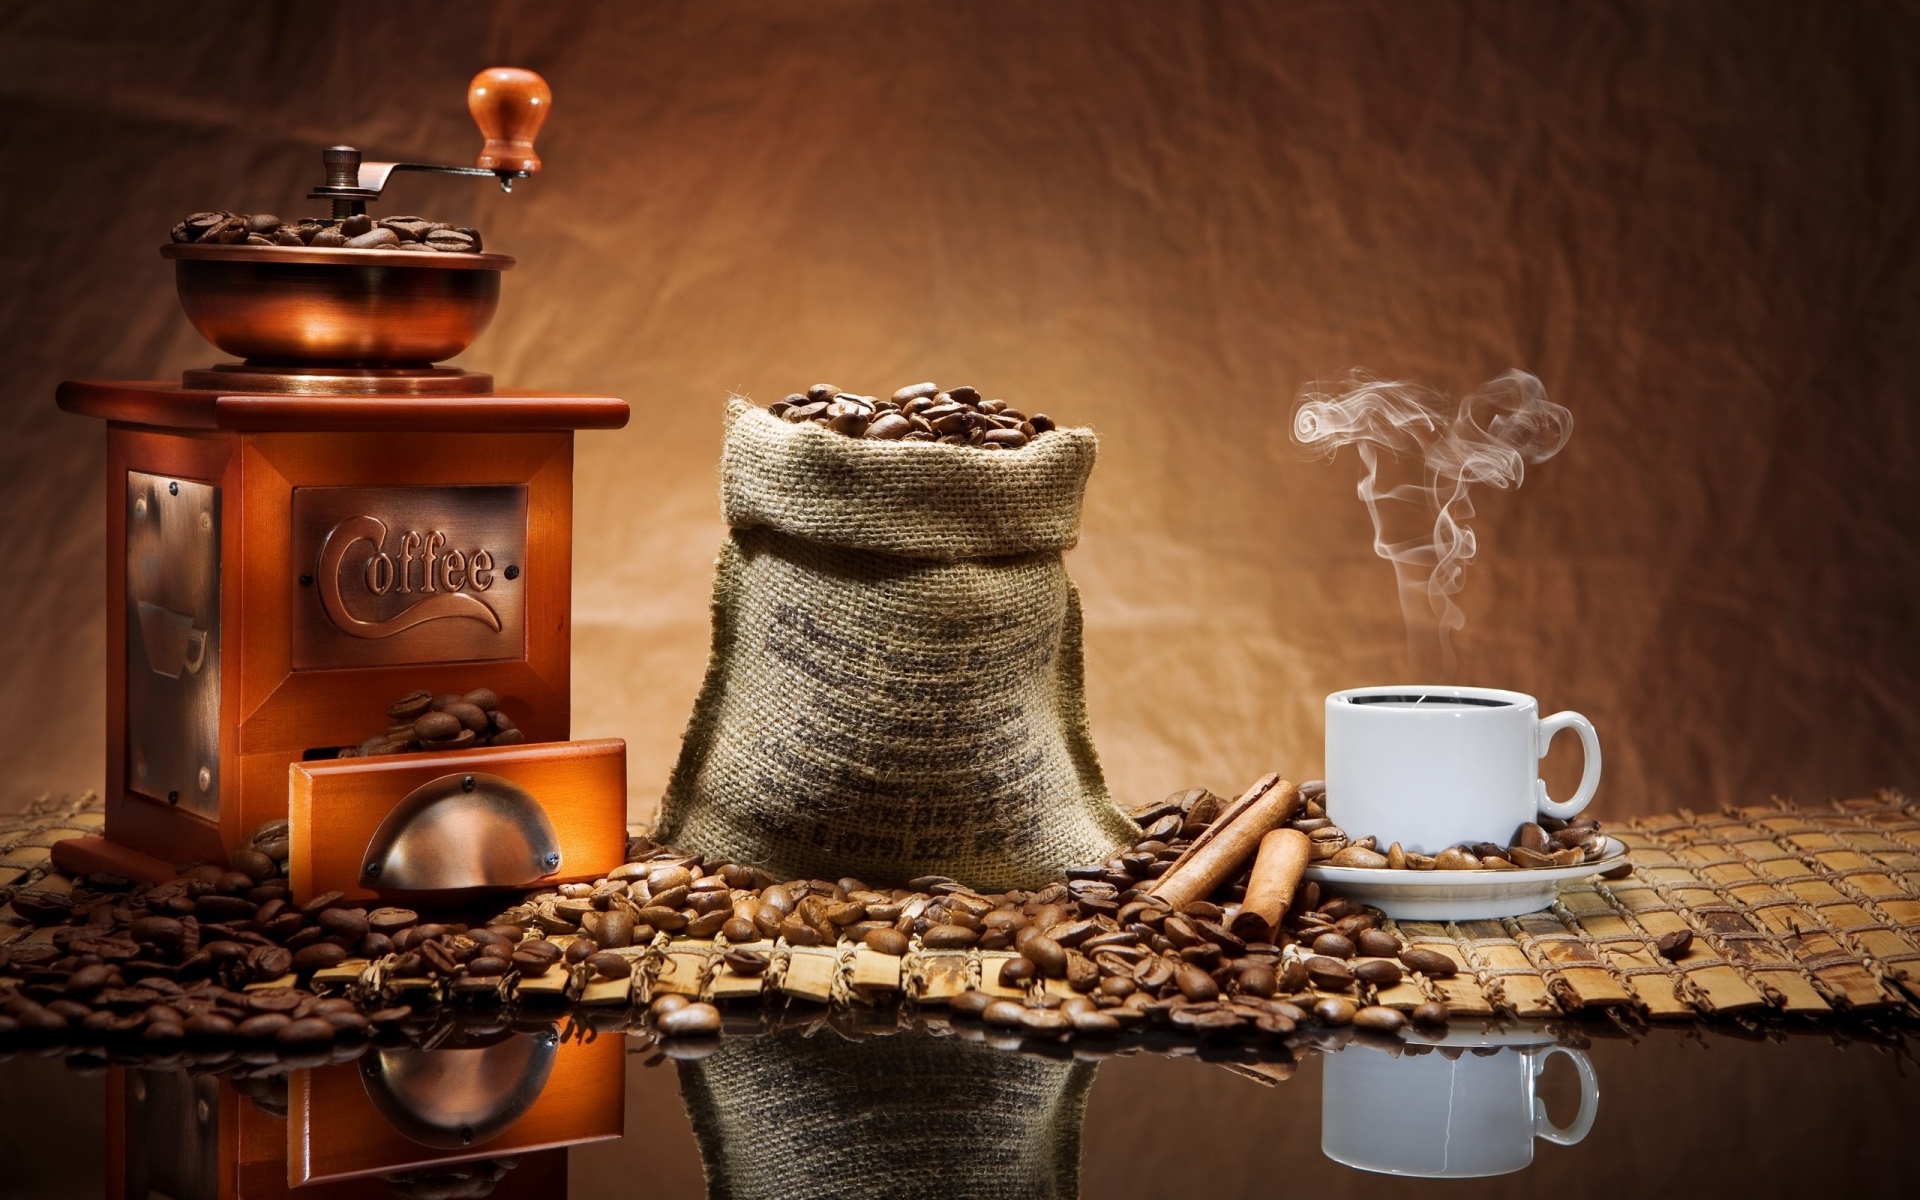 Coffee grinder and coffee